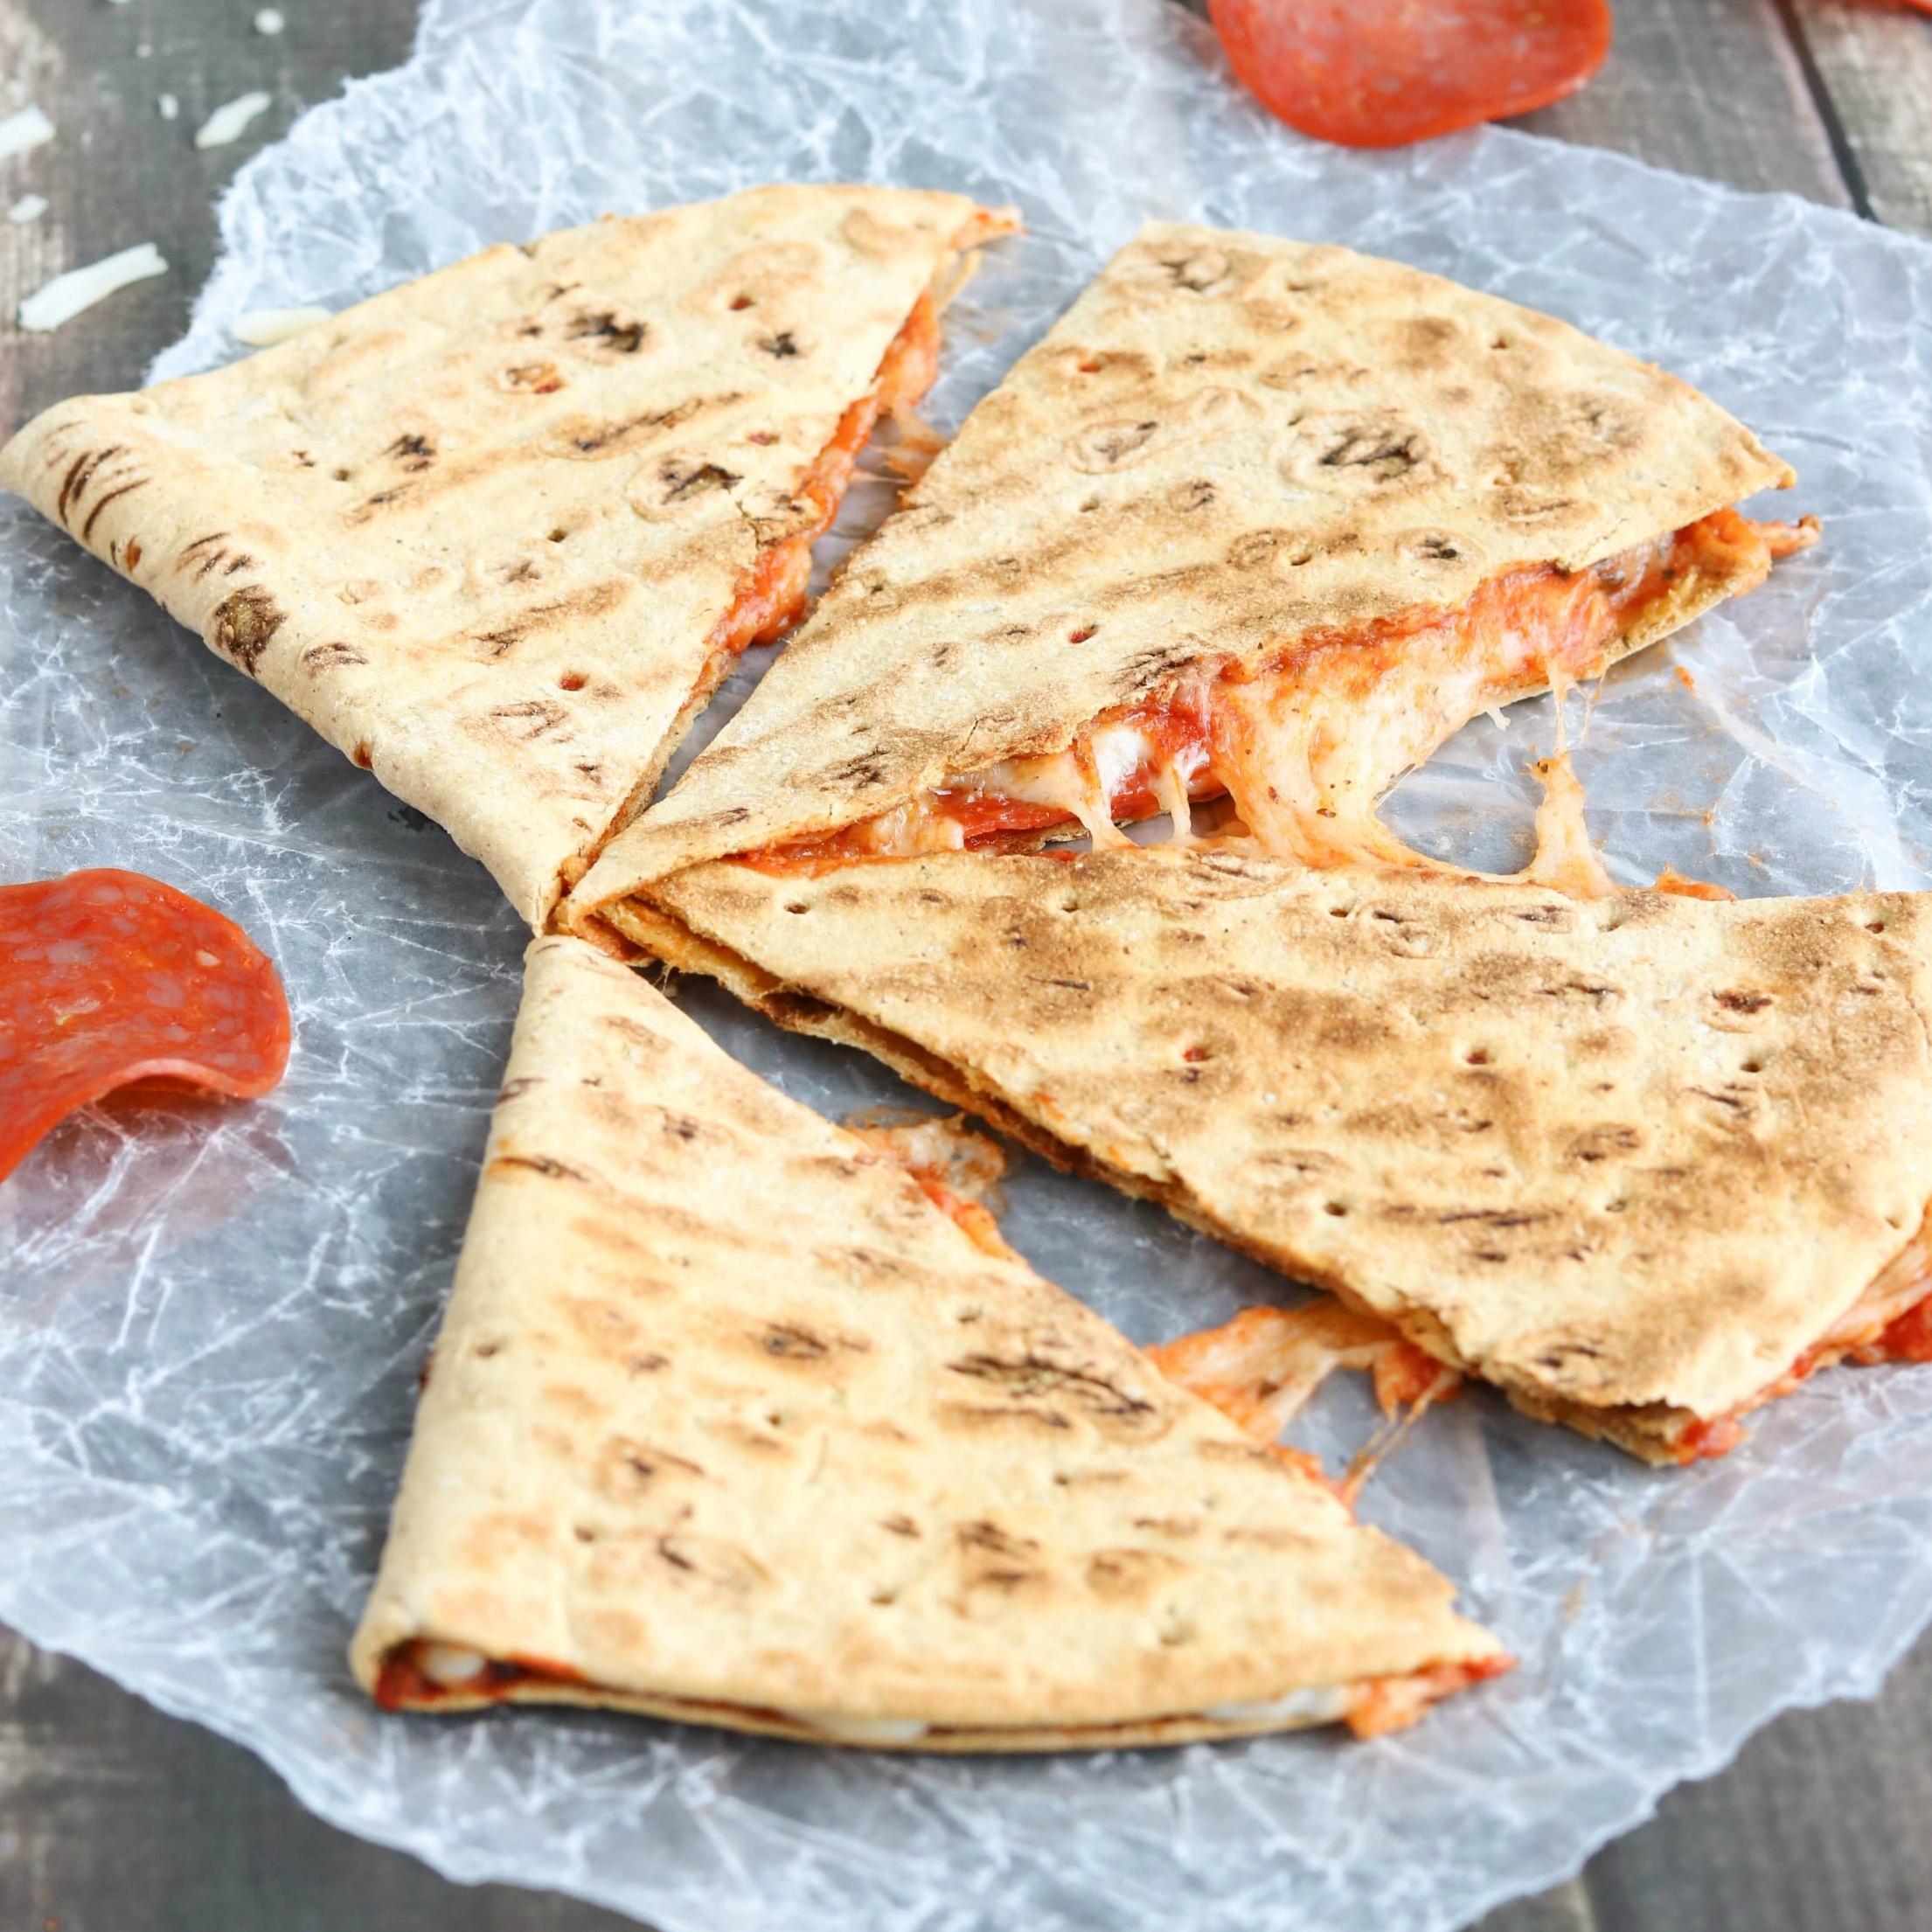  This gluten-free pepperoni pizza quesadilla is about to become your new go-to comfort food.